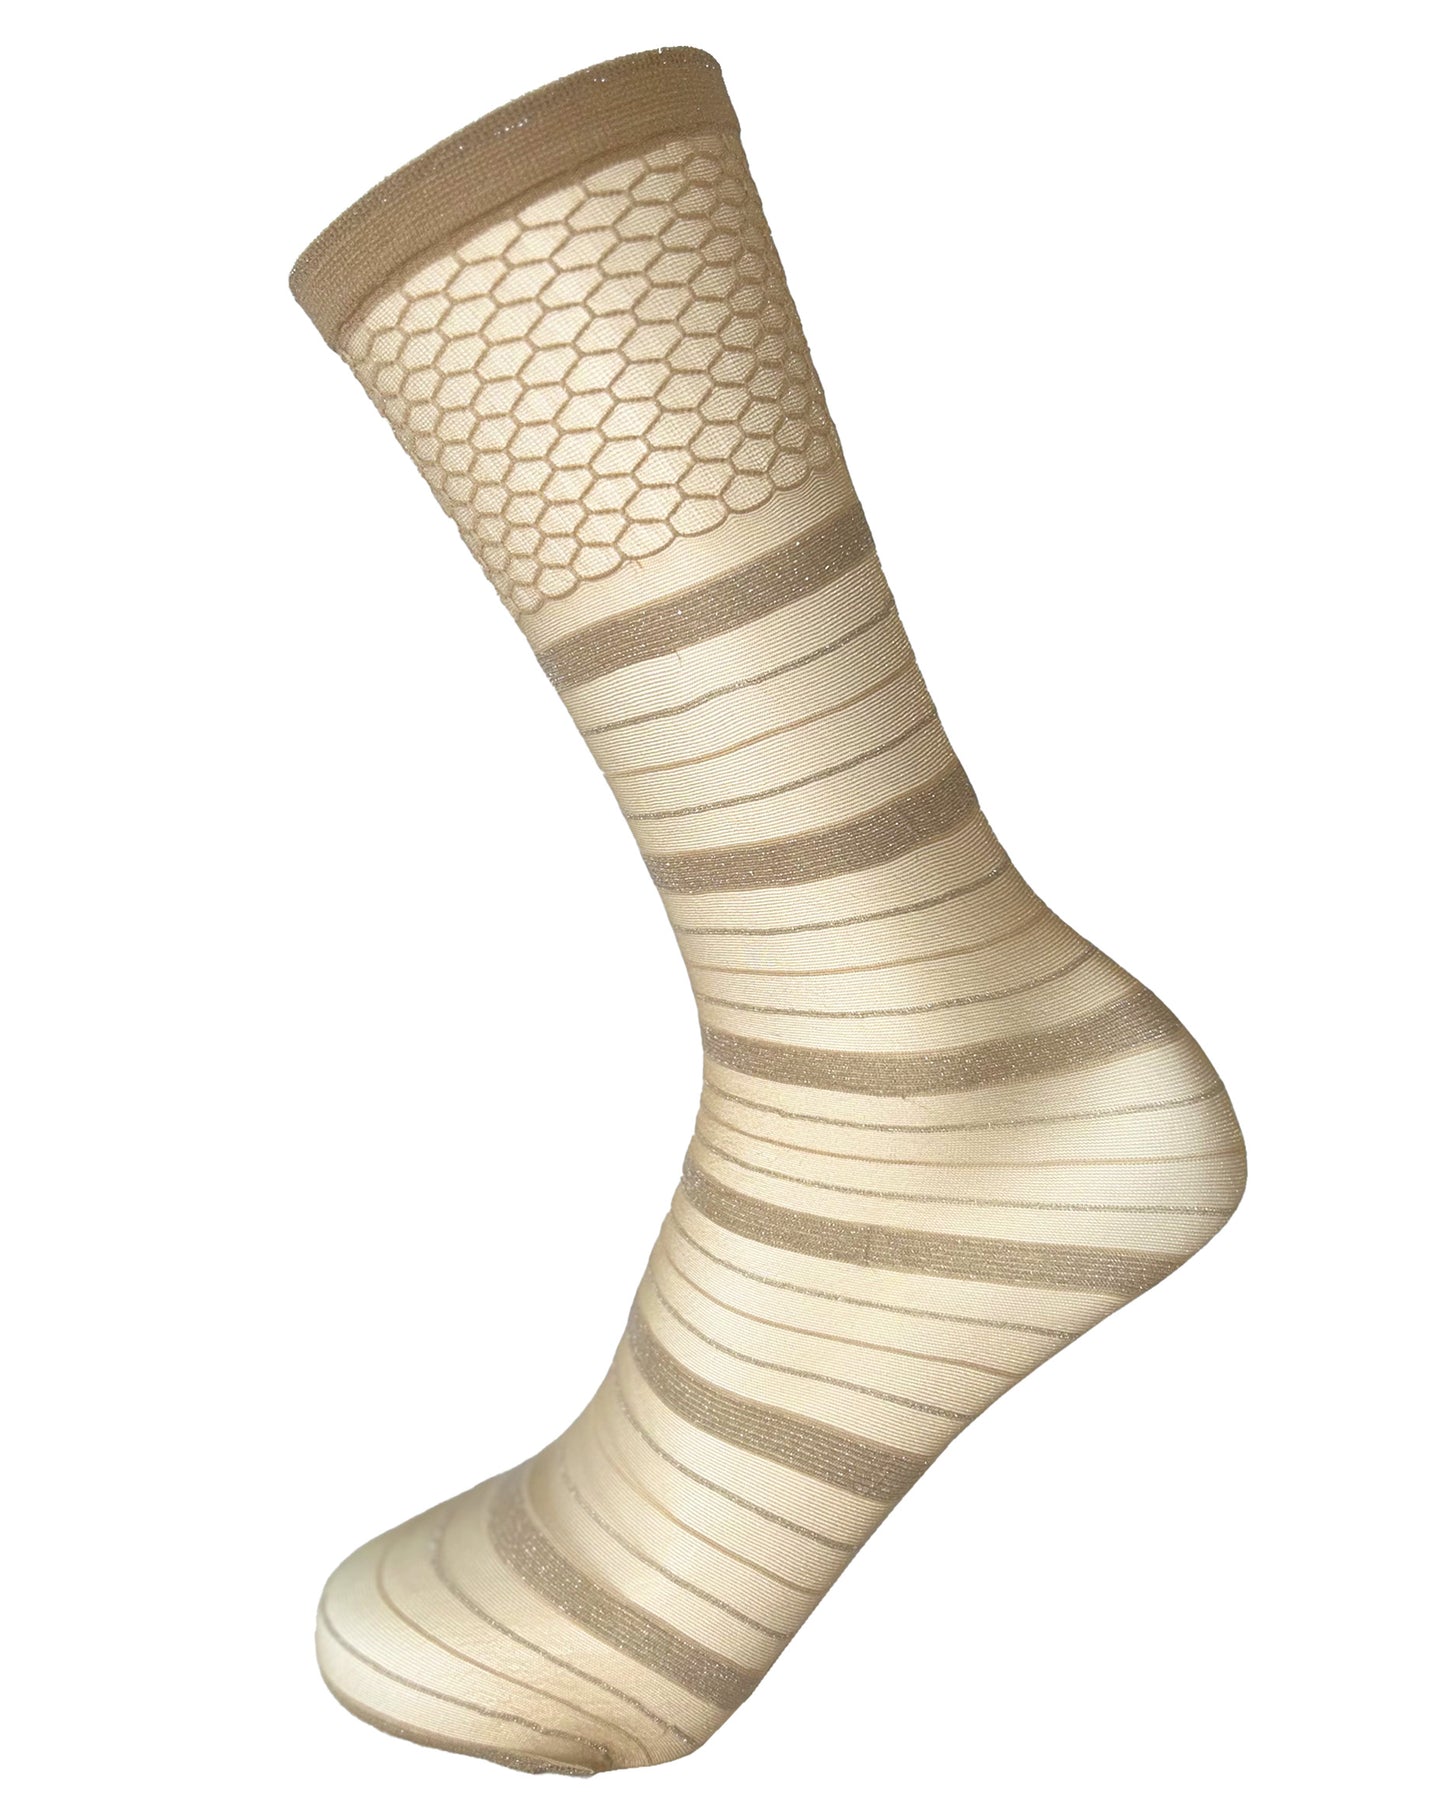 SiSi Lines Calzino - Sheer nude fashion ankle socks with a horizontal striped pattern with sparkly silver lamé and deep honeycomb patterned cuff.